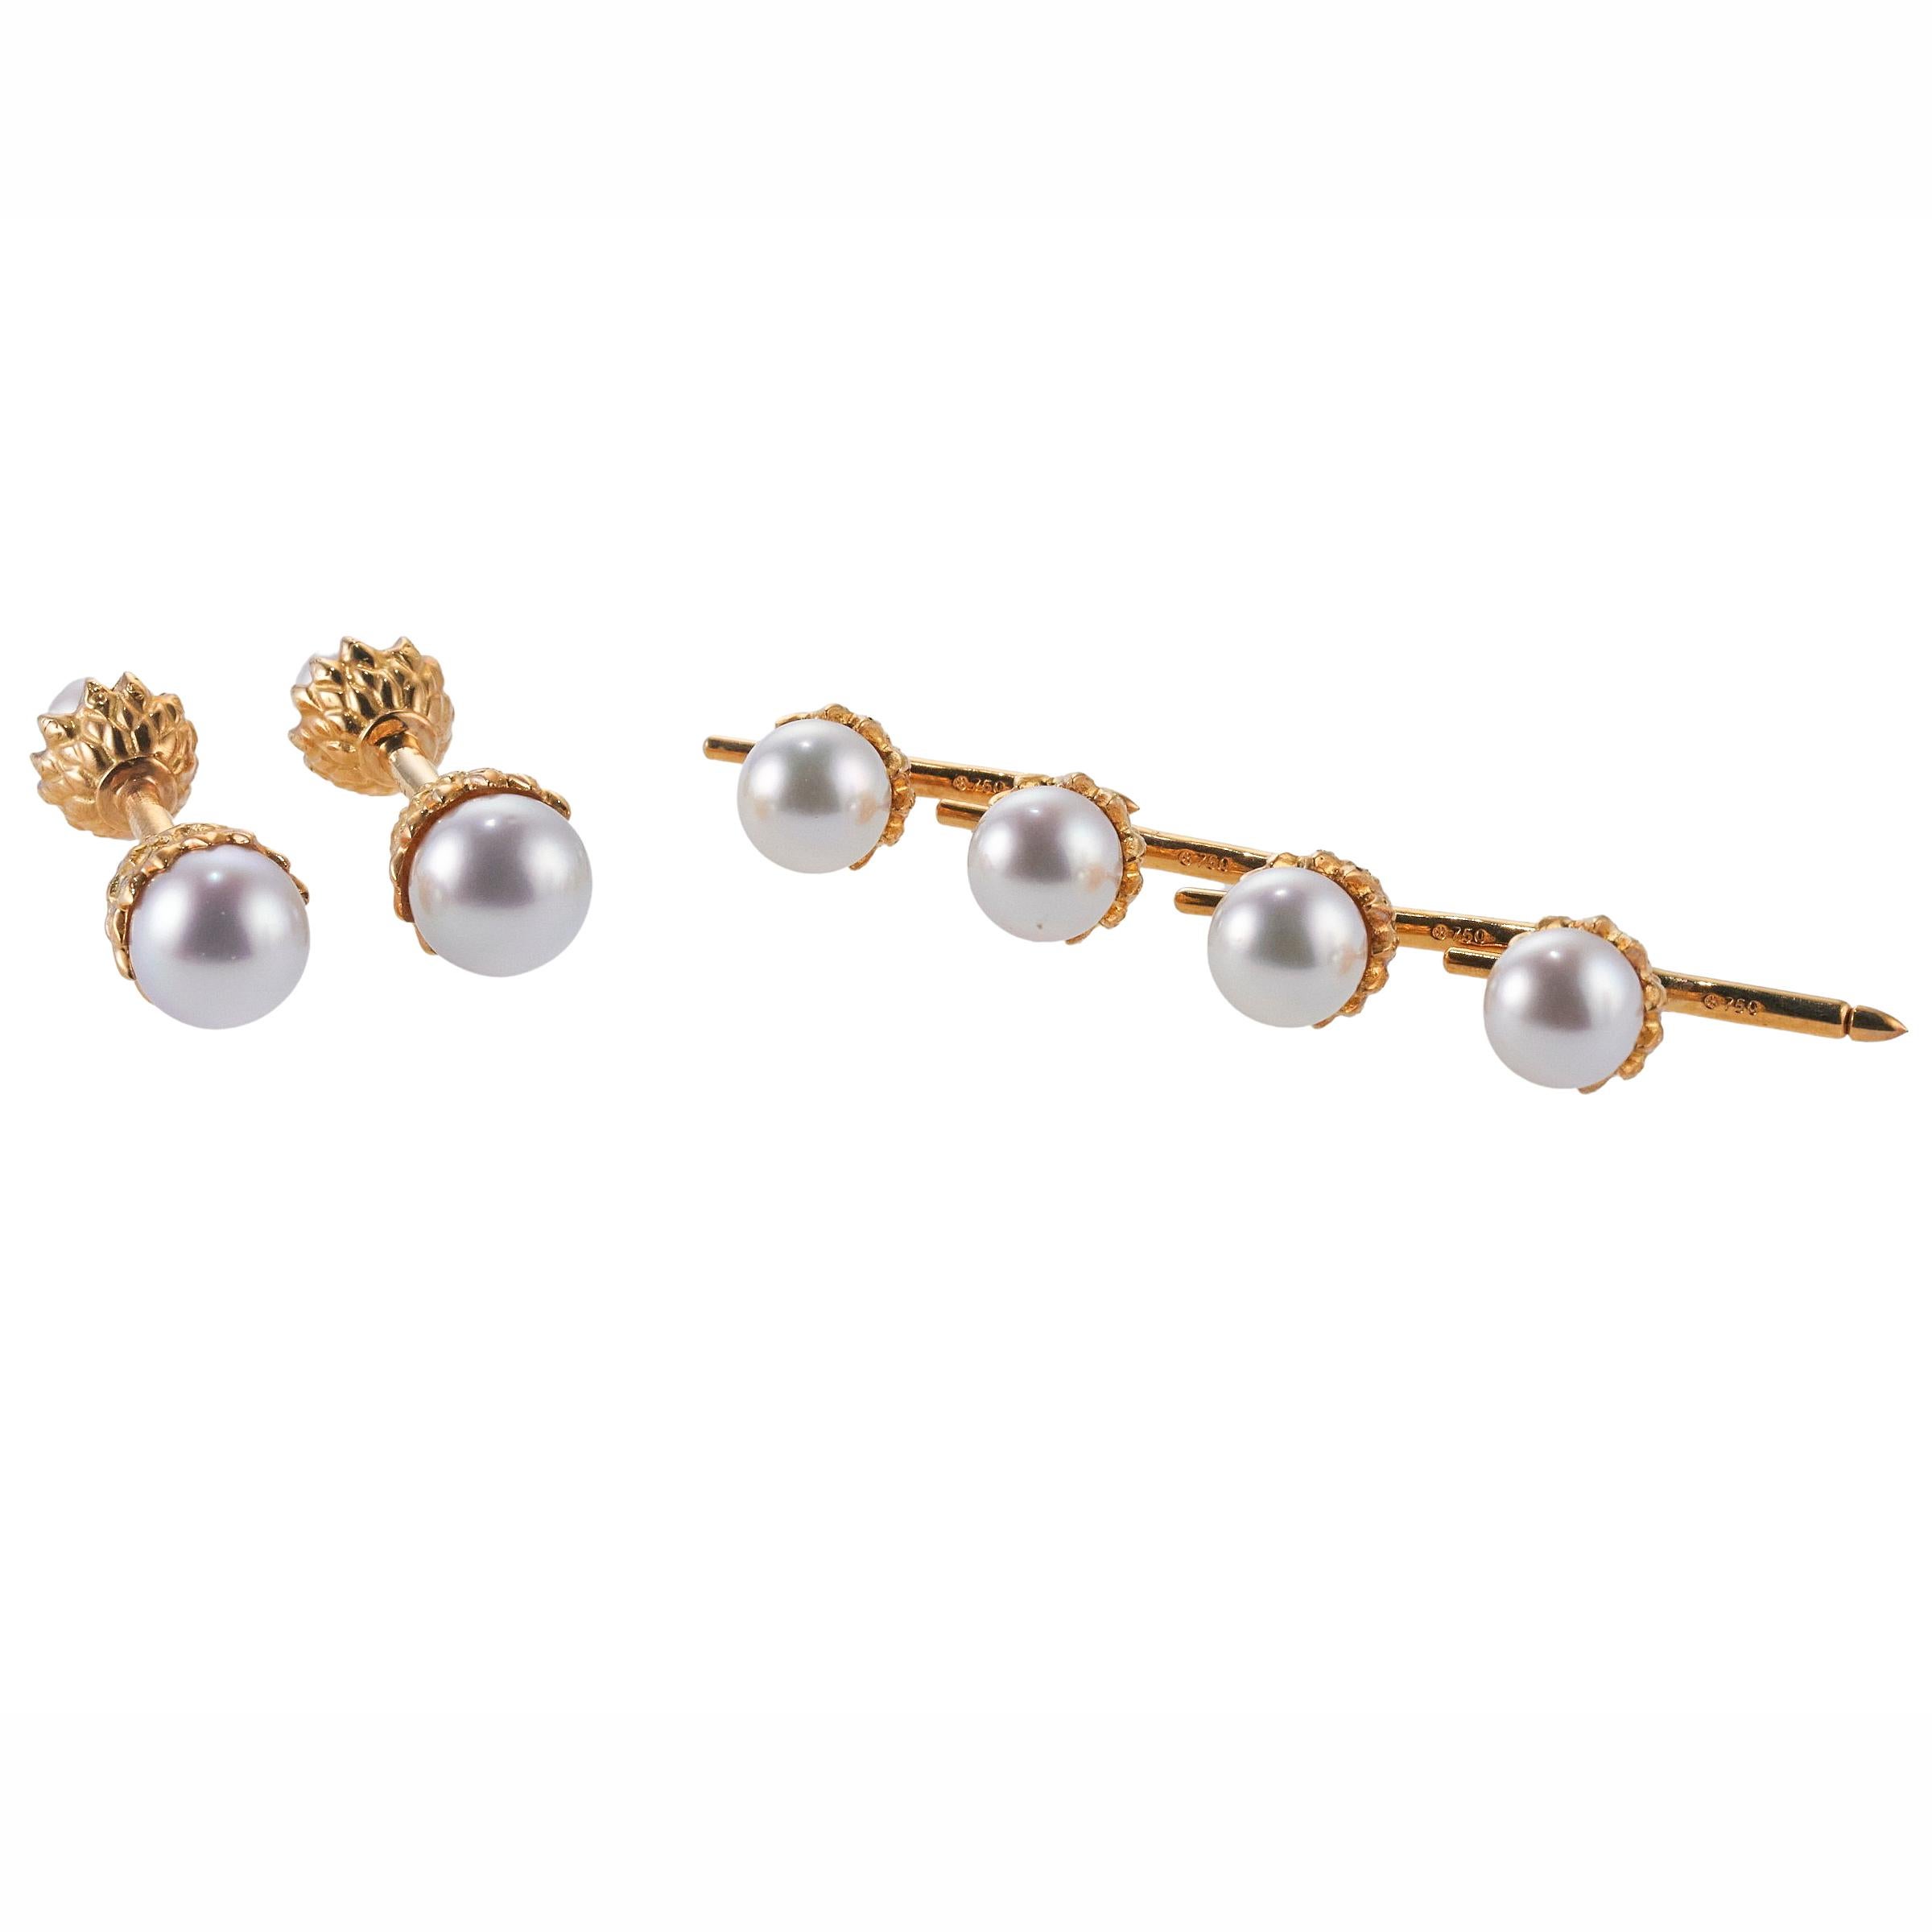 18K yellow gold South Sea Pearl cufflinks and studs set by Assael. Cufflink's top measure 10.5mm and back is 8.7mm; Stud top is 9mm. Marked: 18k, 585 (stud hardware). Weight is 29.3 grams. Retail Value $8000.